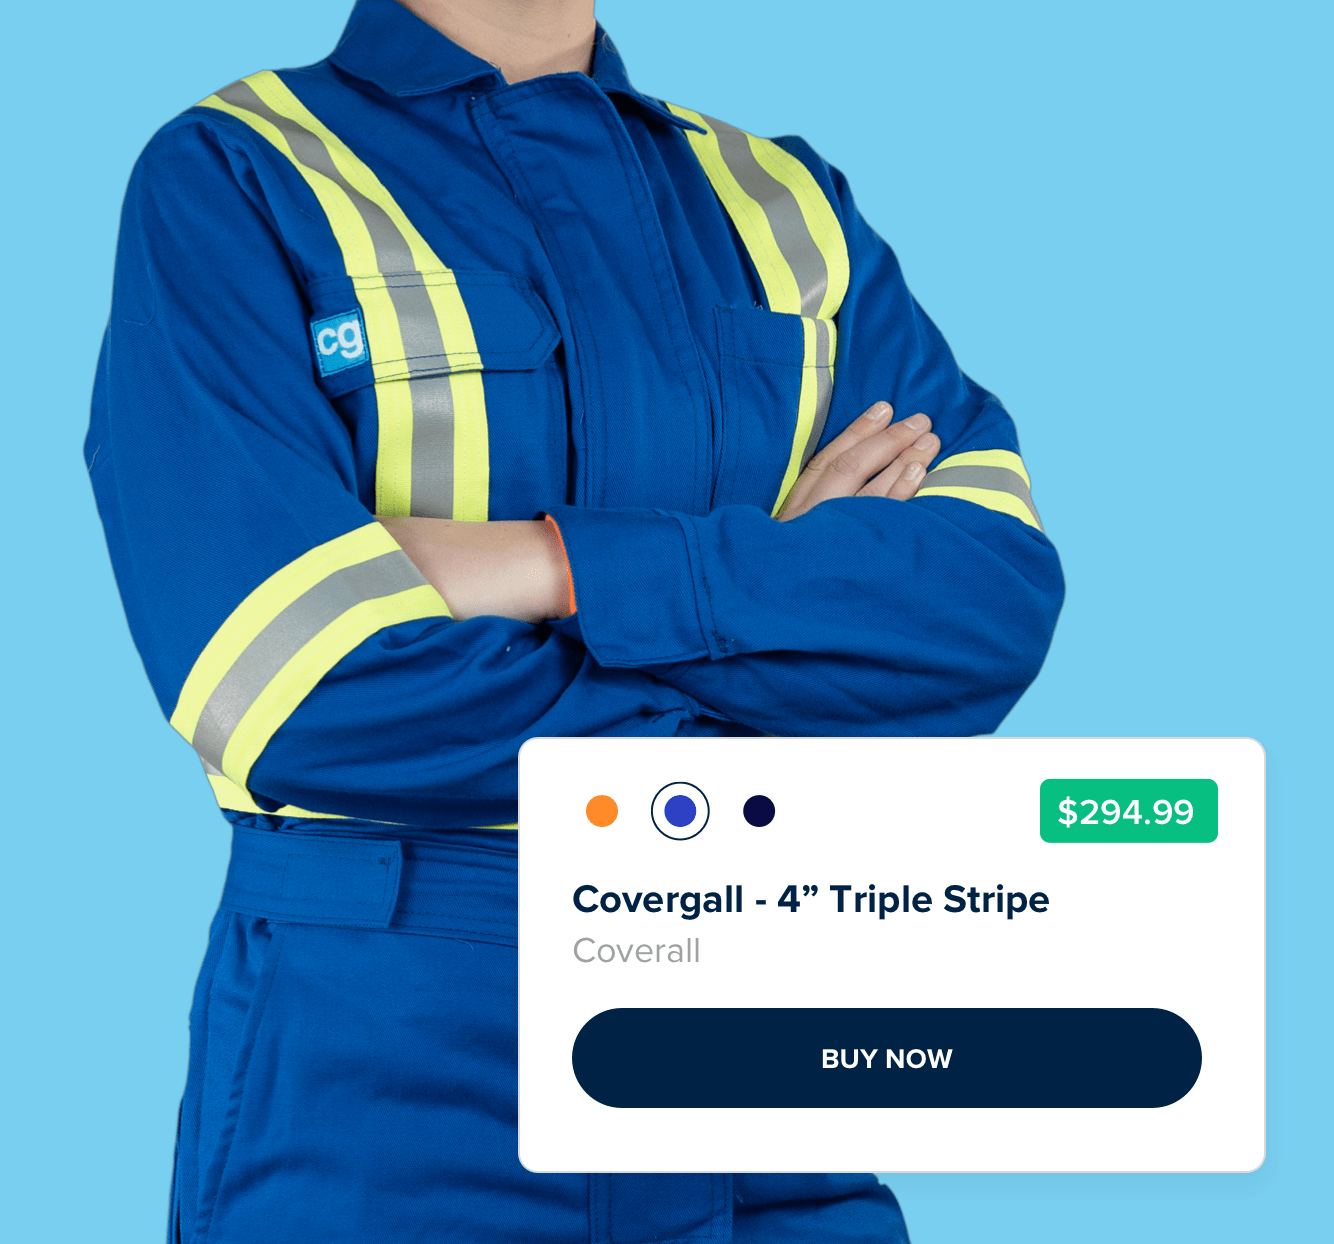 E-Commerce for Industrial Workwear